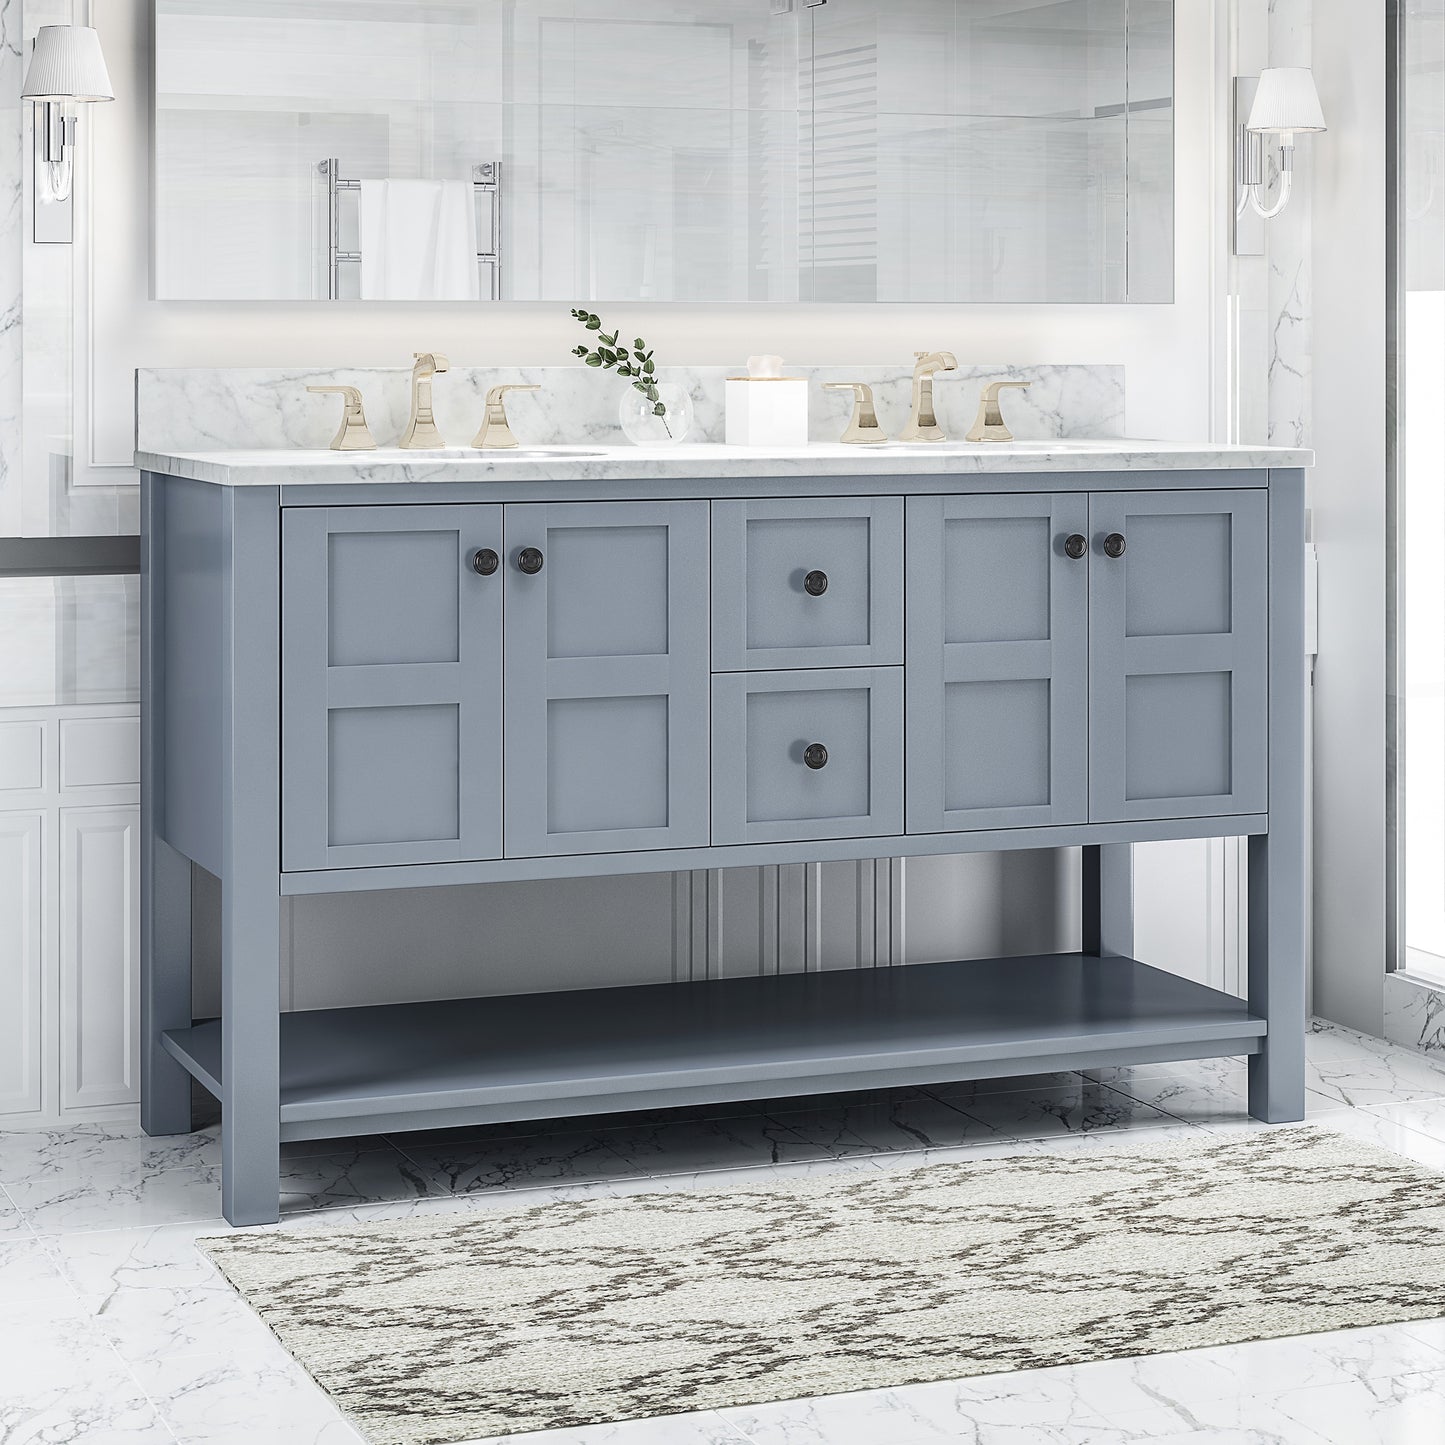 Jamison Contemporary 60" Wood Bathroom Vanity (Counter Top Not Included)